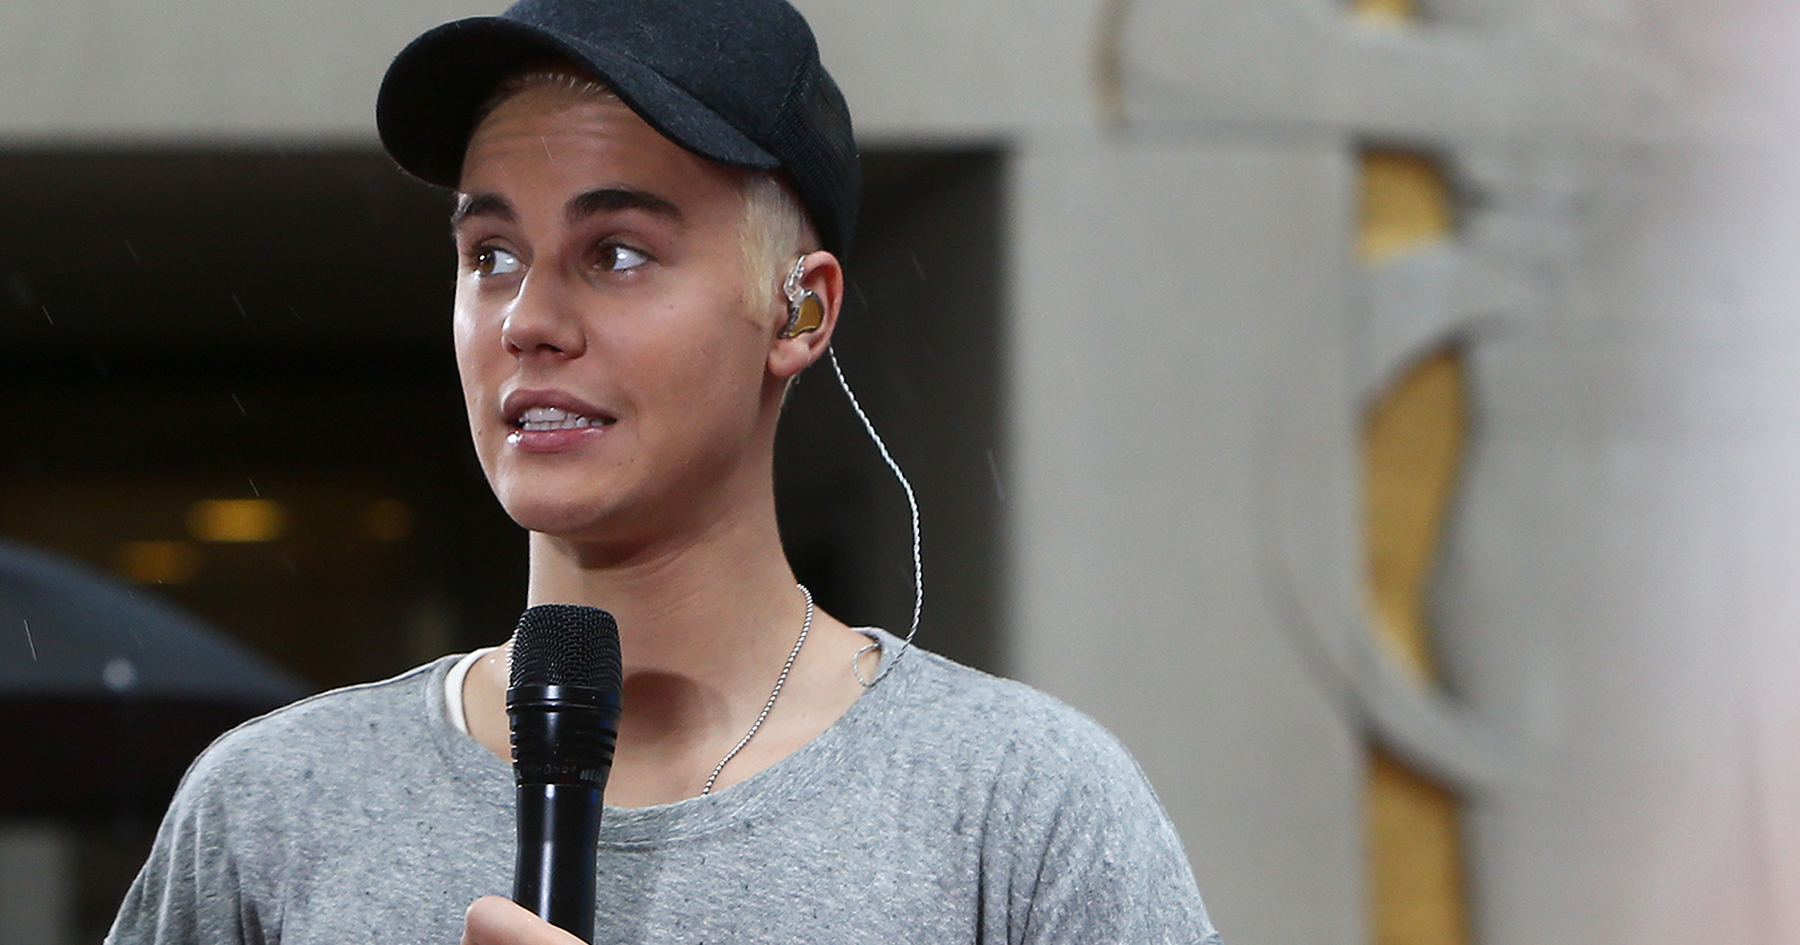 justin-bieber-with-microphone